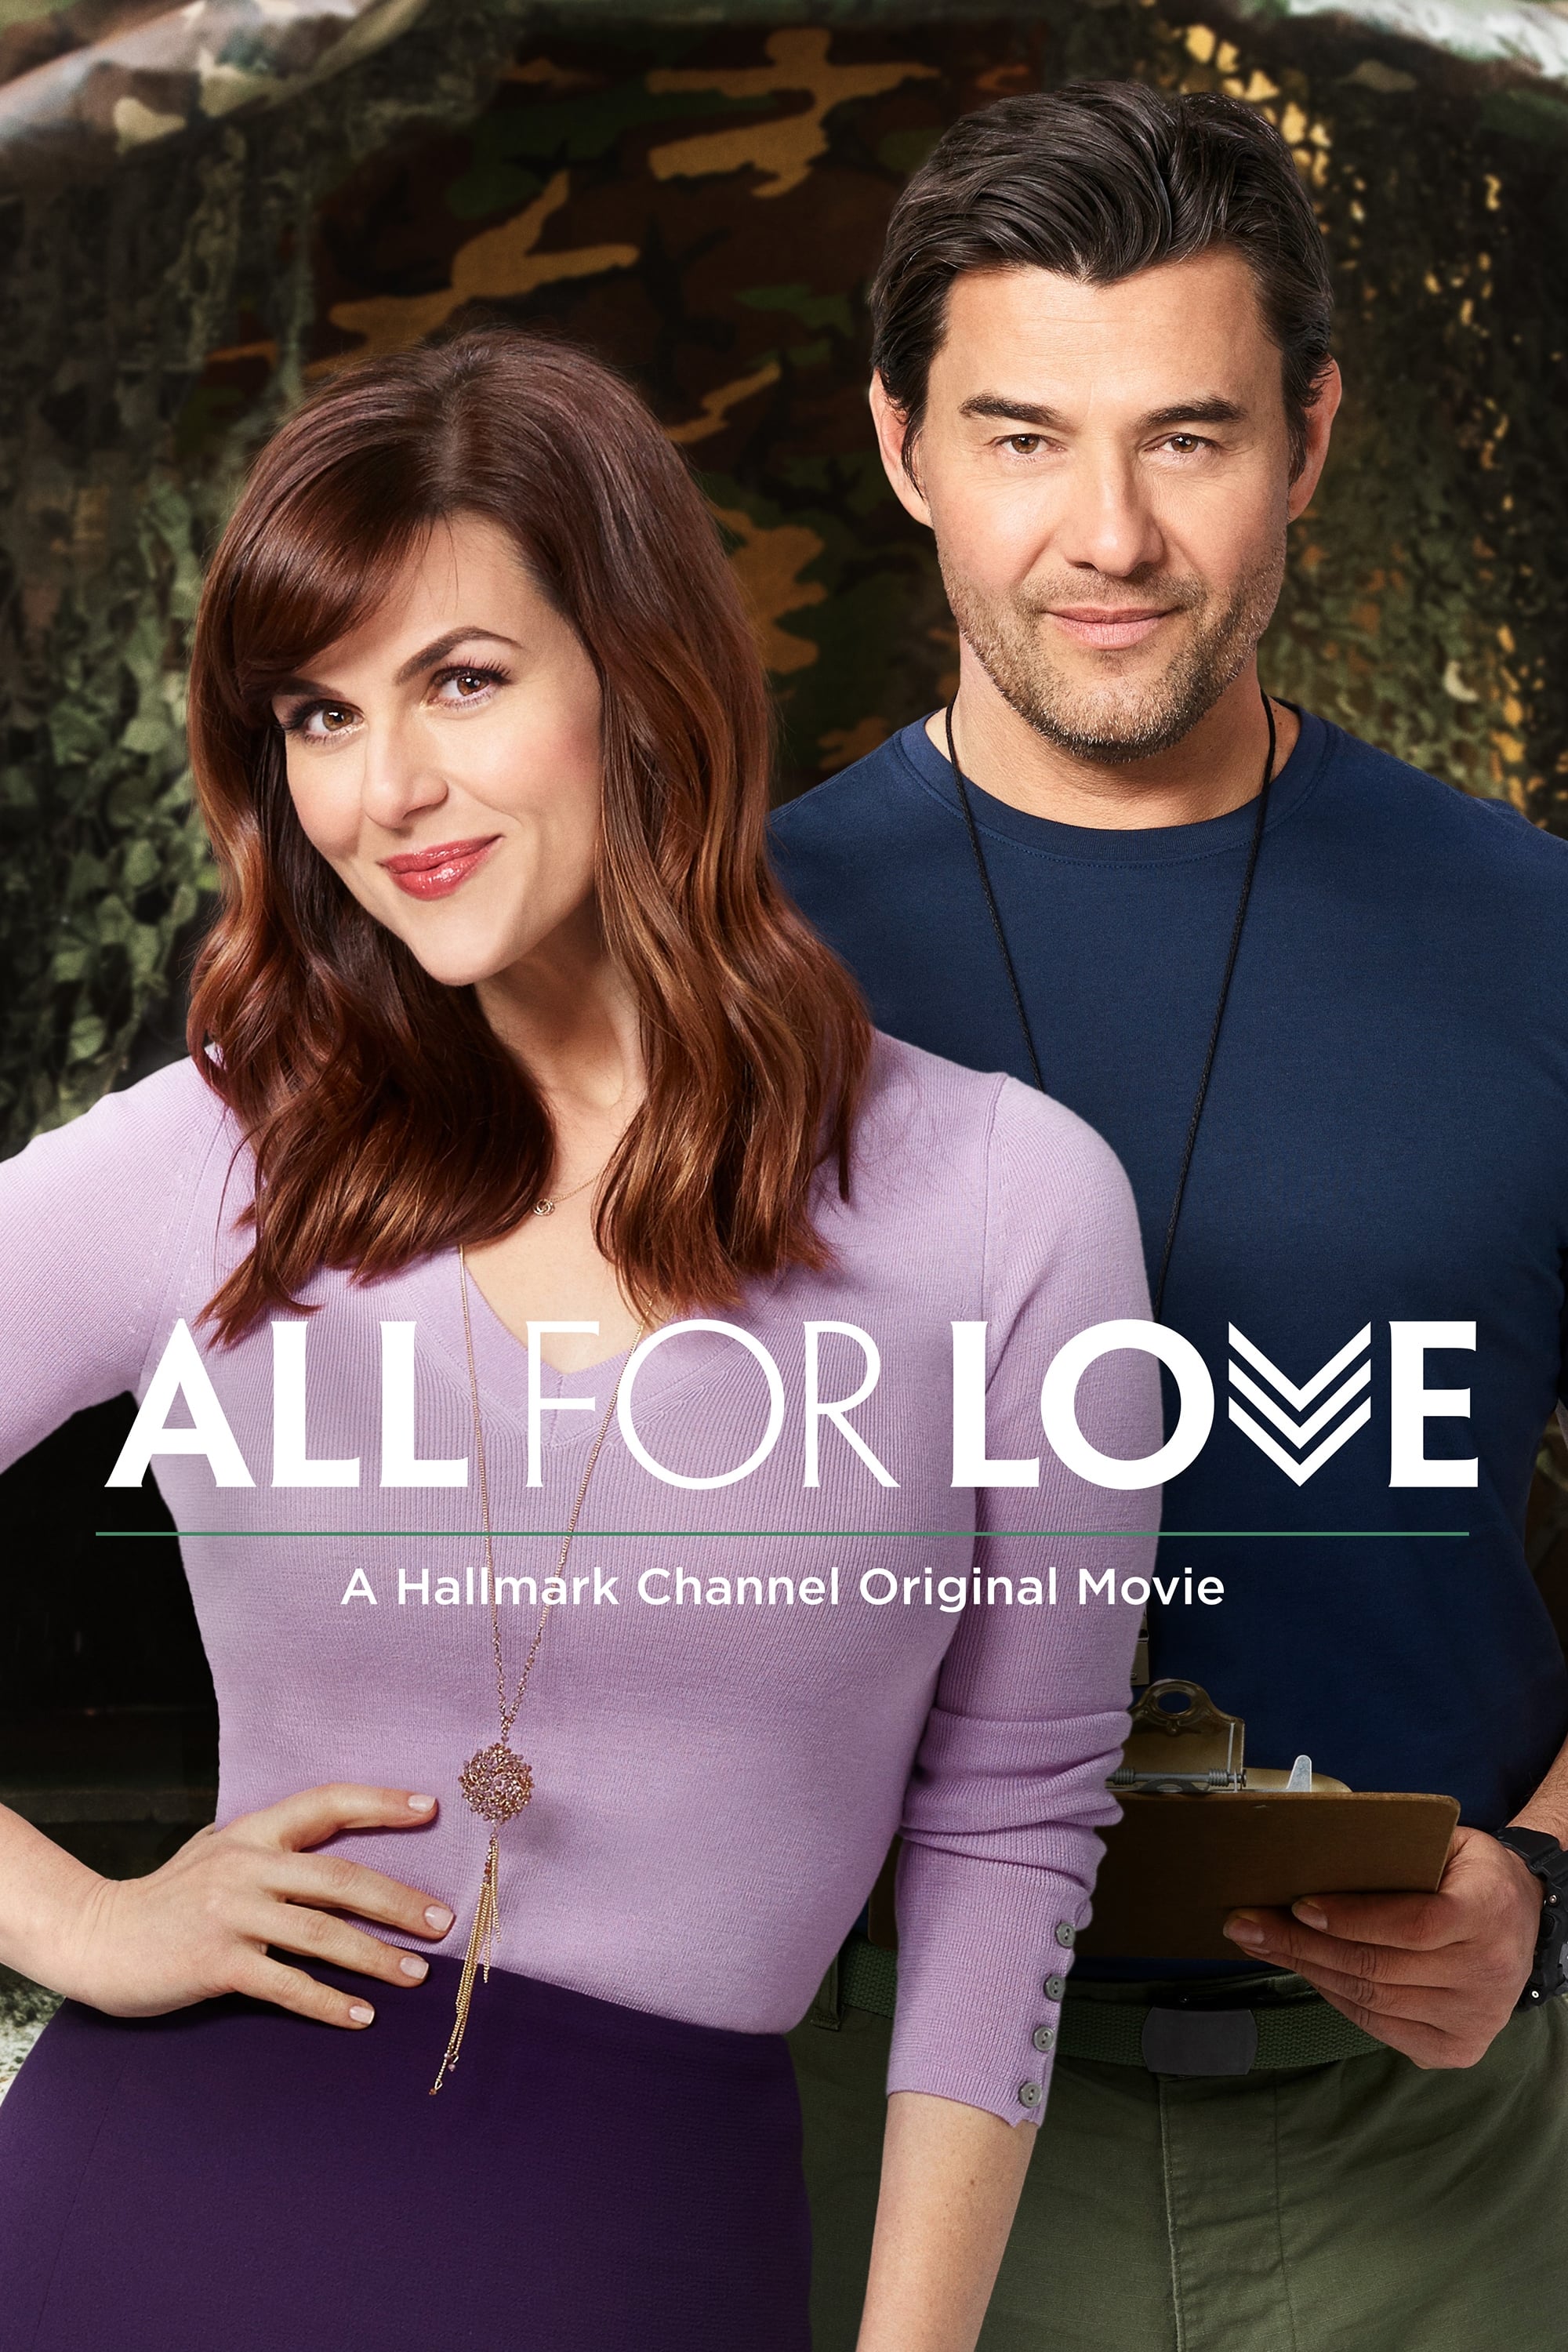 All for Love (2017)